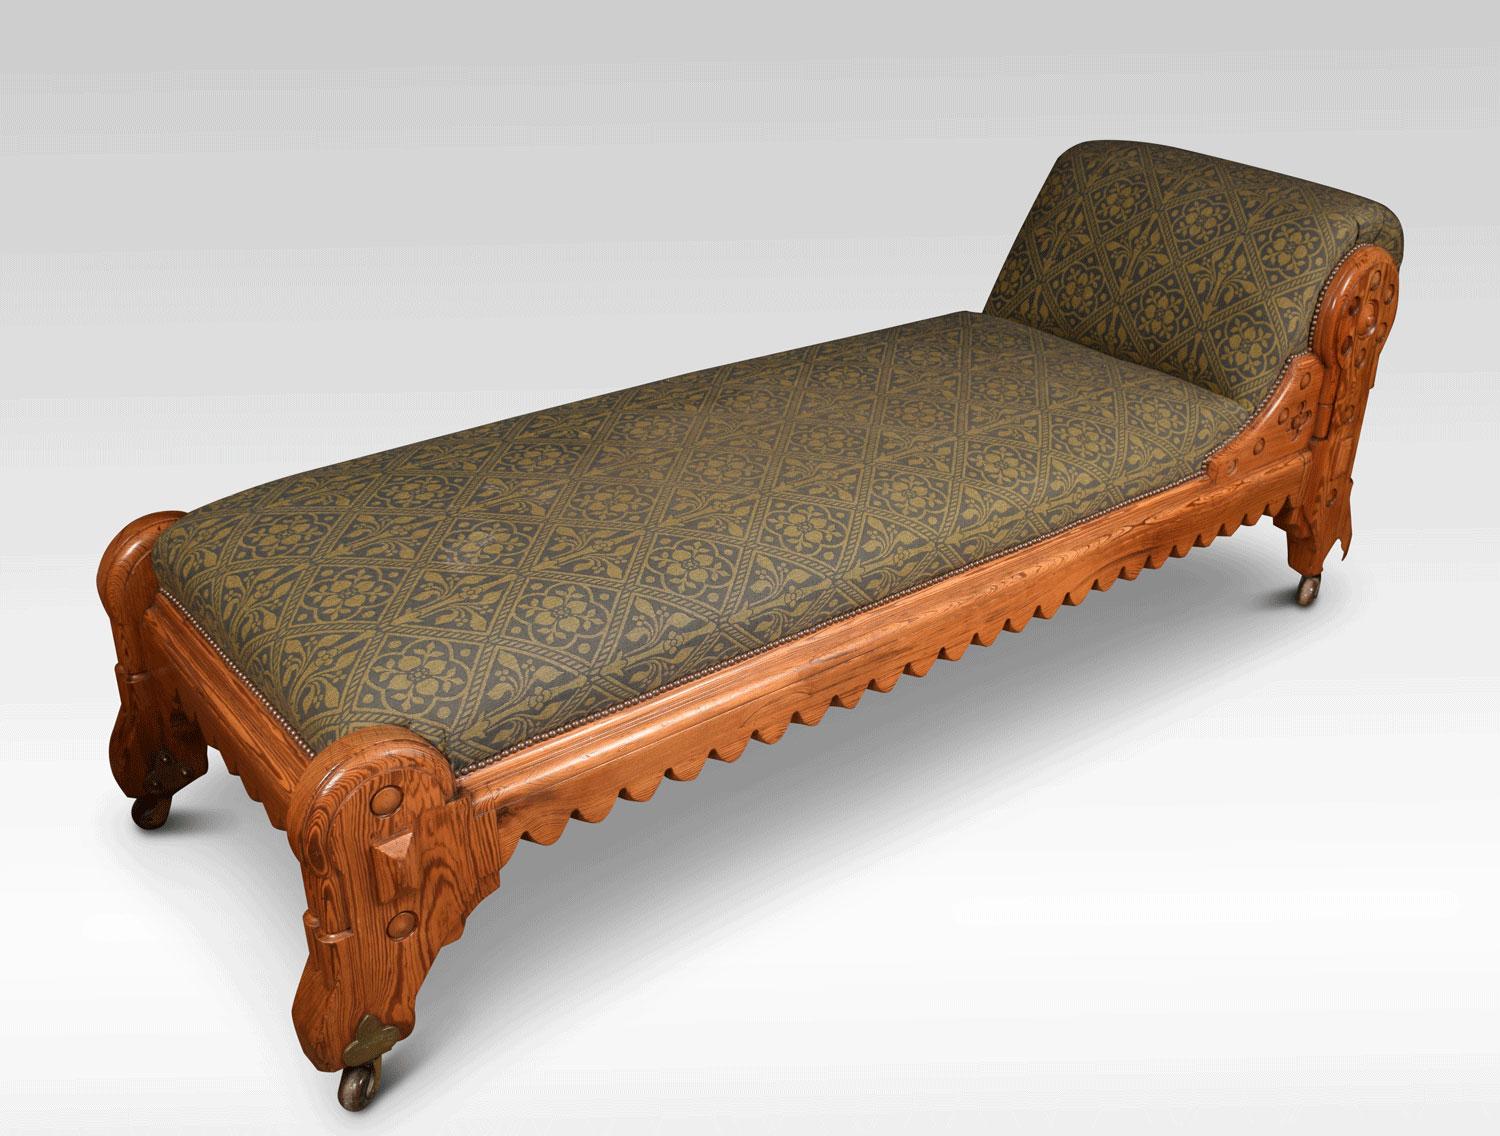 British Gothic Revival Pitch Pine Chaise Lounge